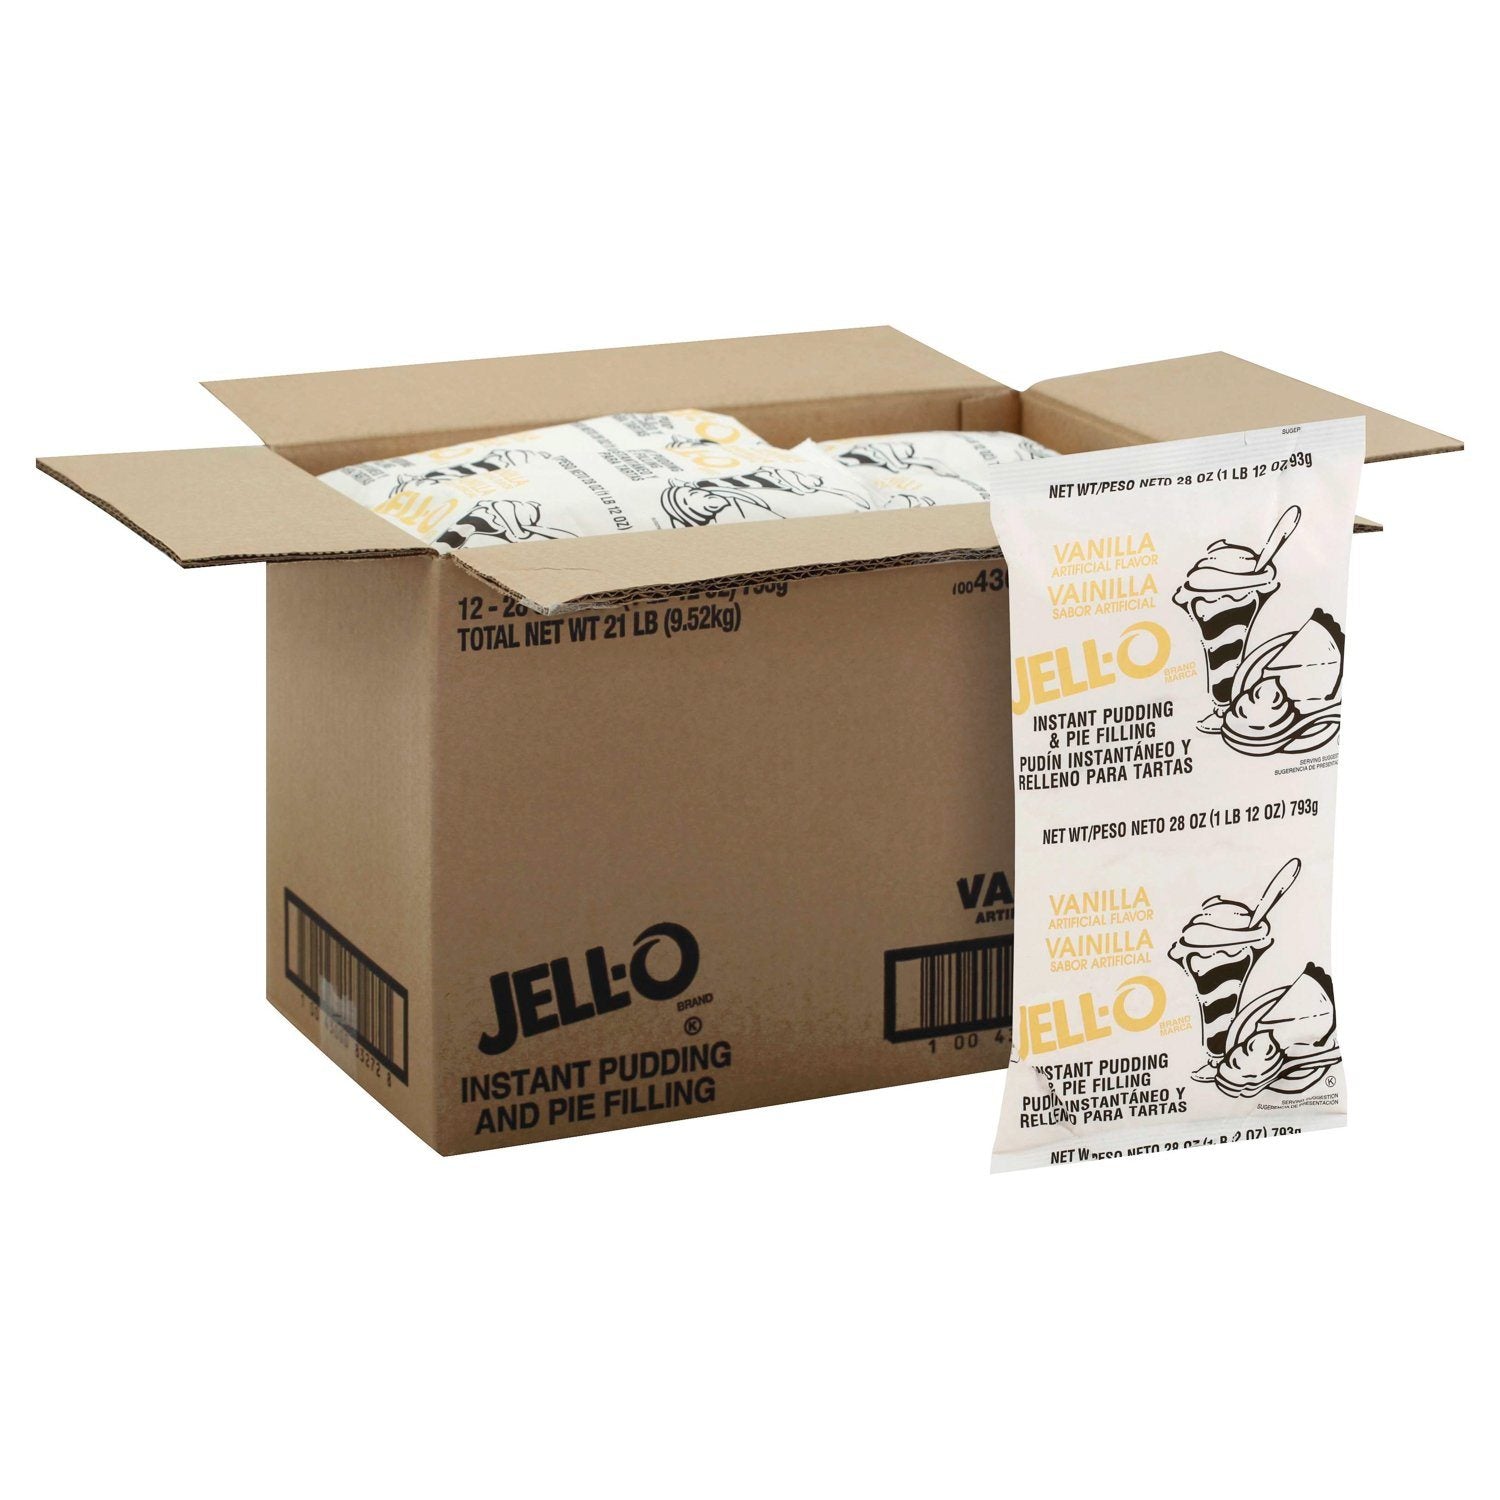 Jell-O Instant Pudding & Pie Filling Mixes Jell-O Vanilla 1.75 lb-12 Count 